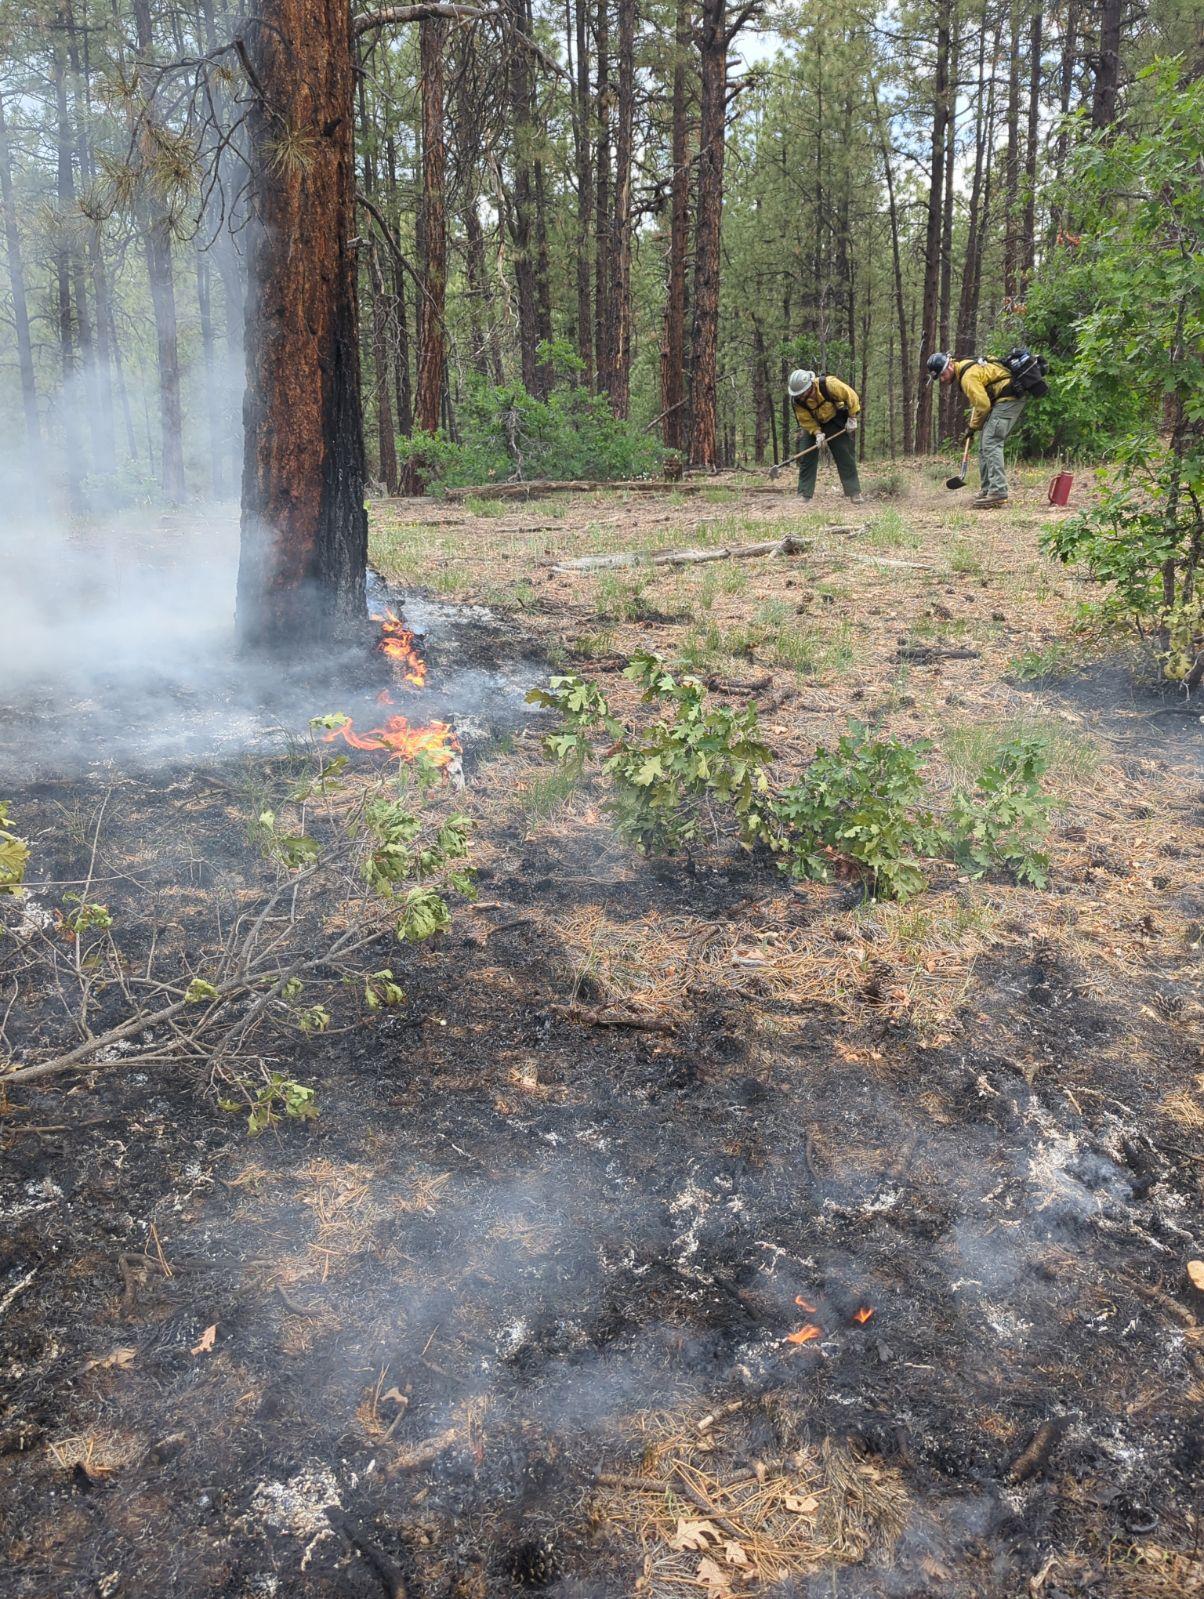 The Snow Ranch Fire is burning under ponderosa pine trees, consuming ground fuels such as needles and dead limbs.